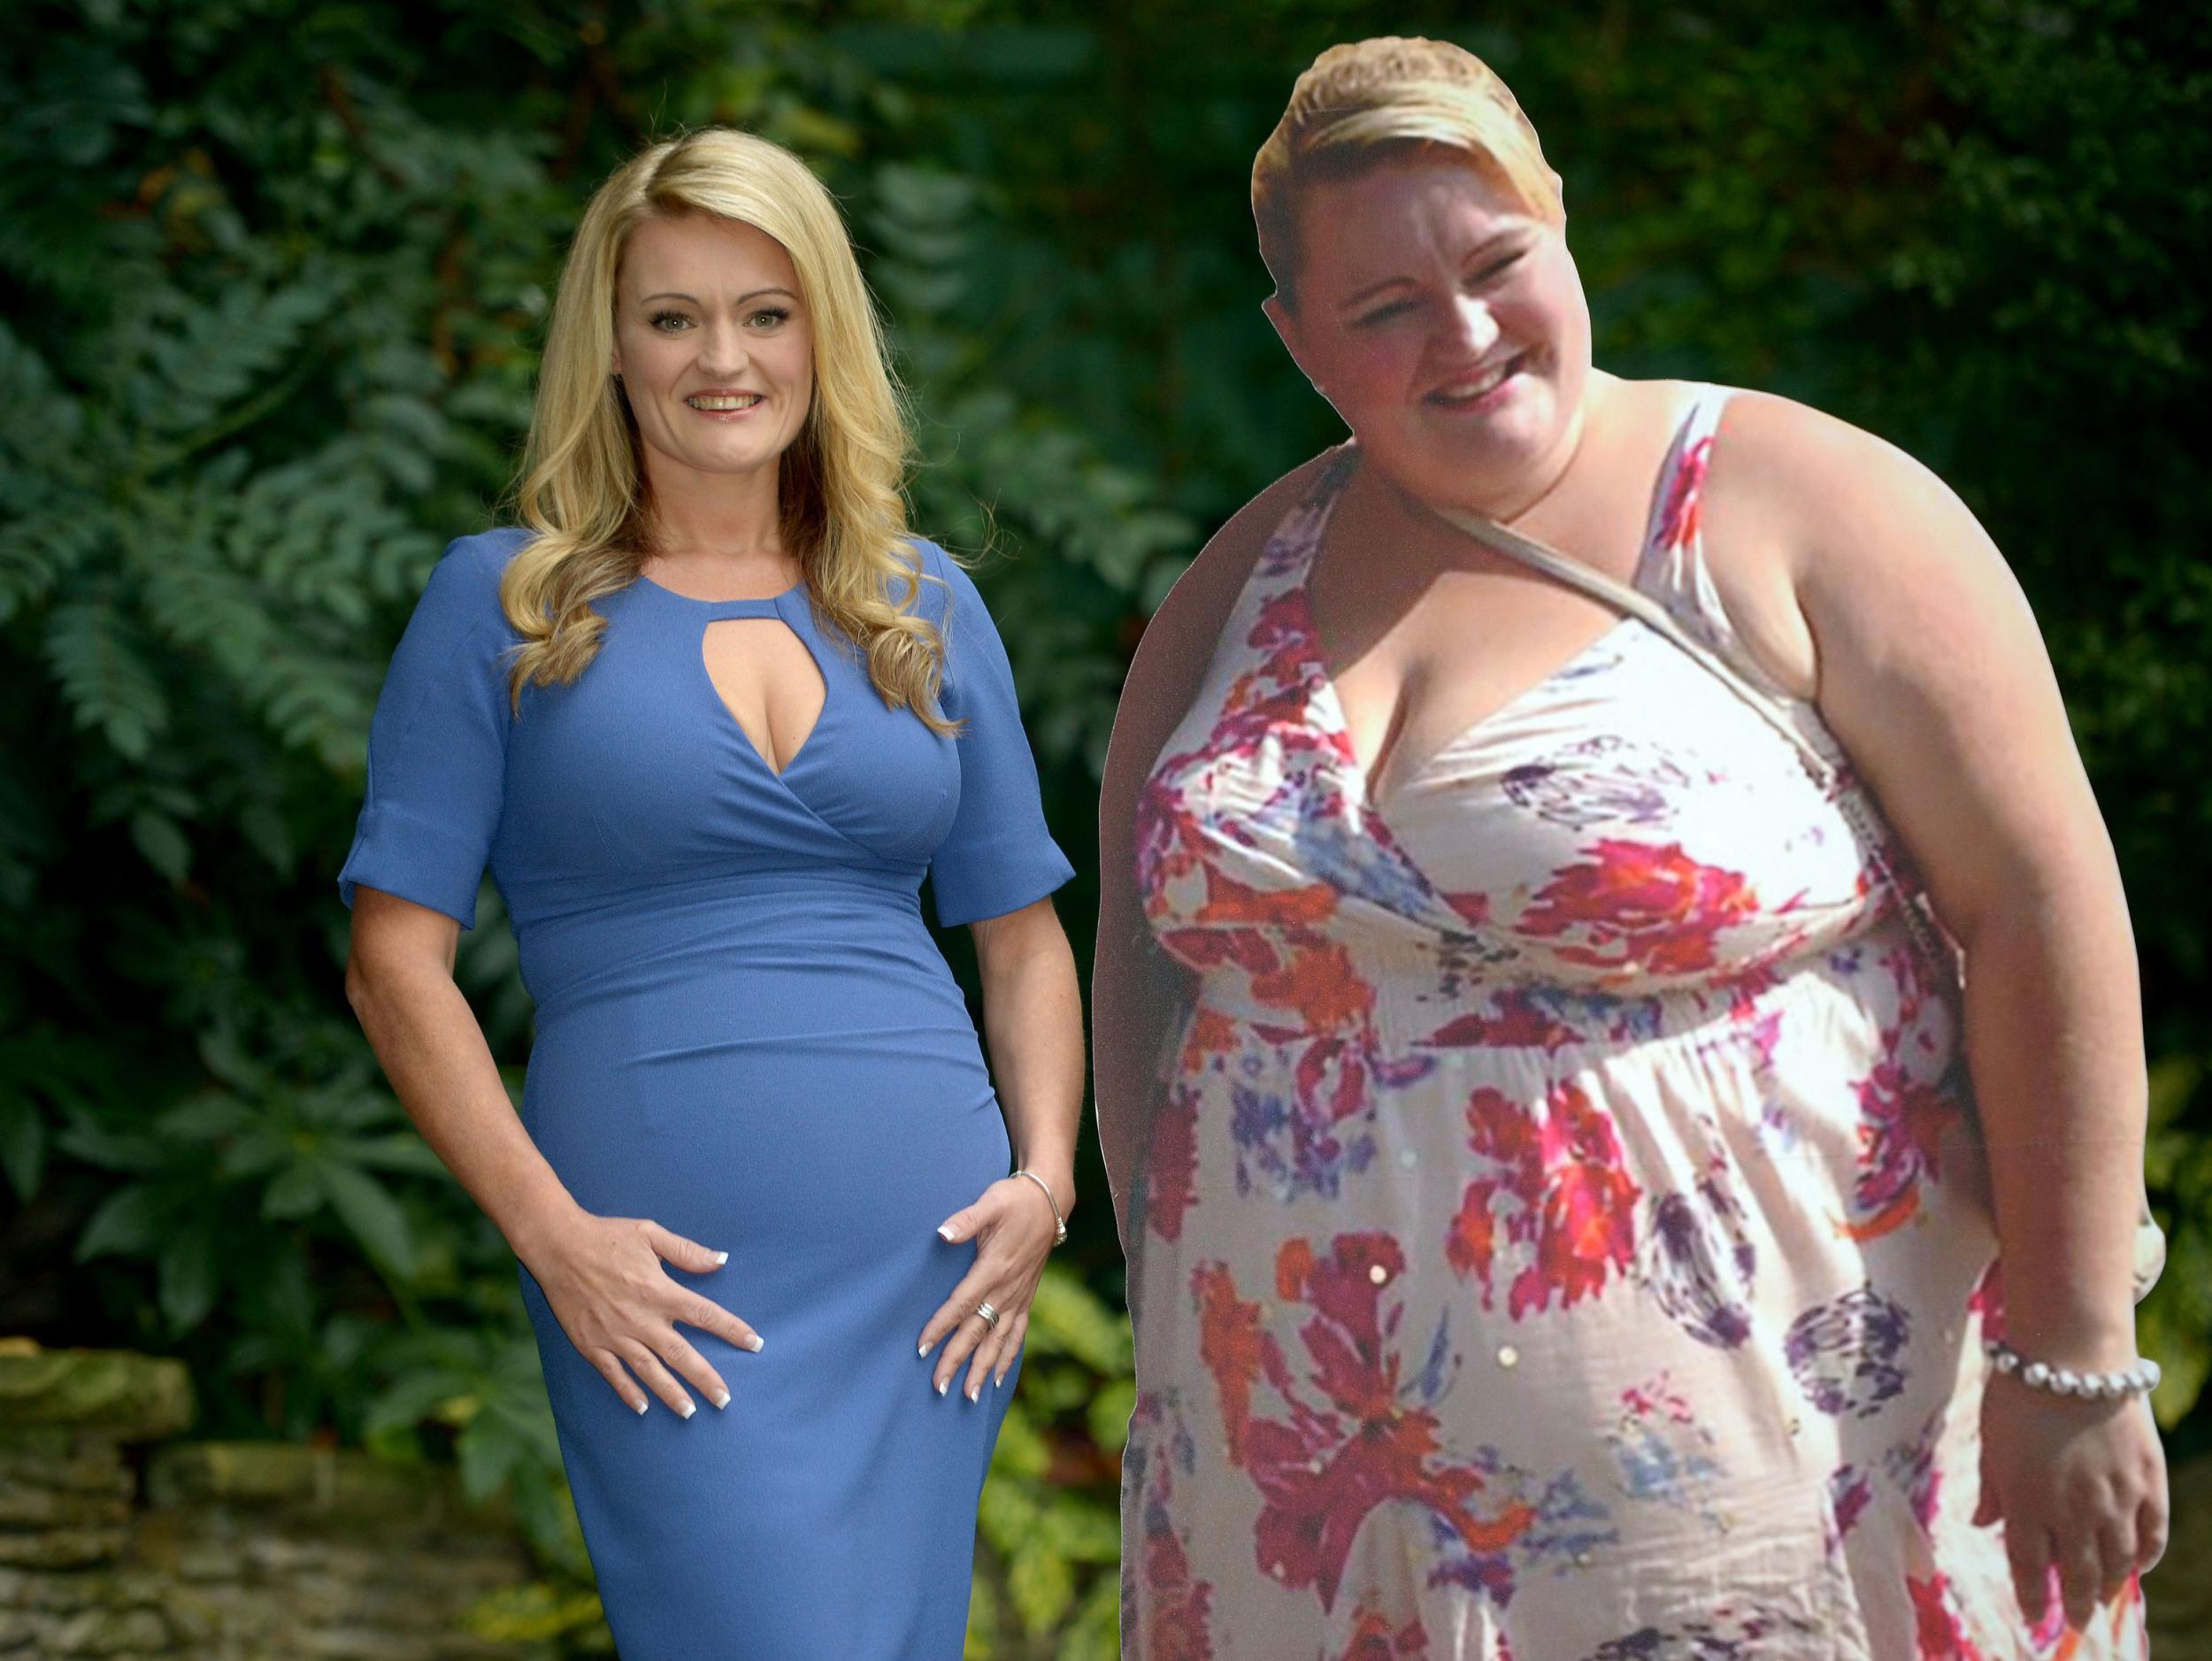 Cheryl Blythe lost 14 stone in just 18 months after being warned she 'could die'